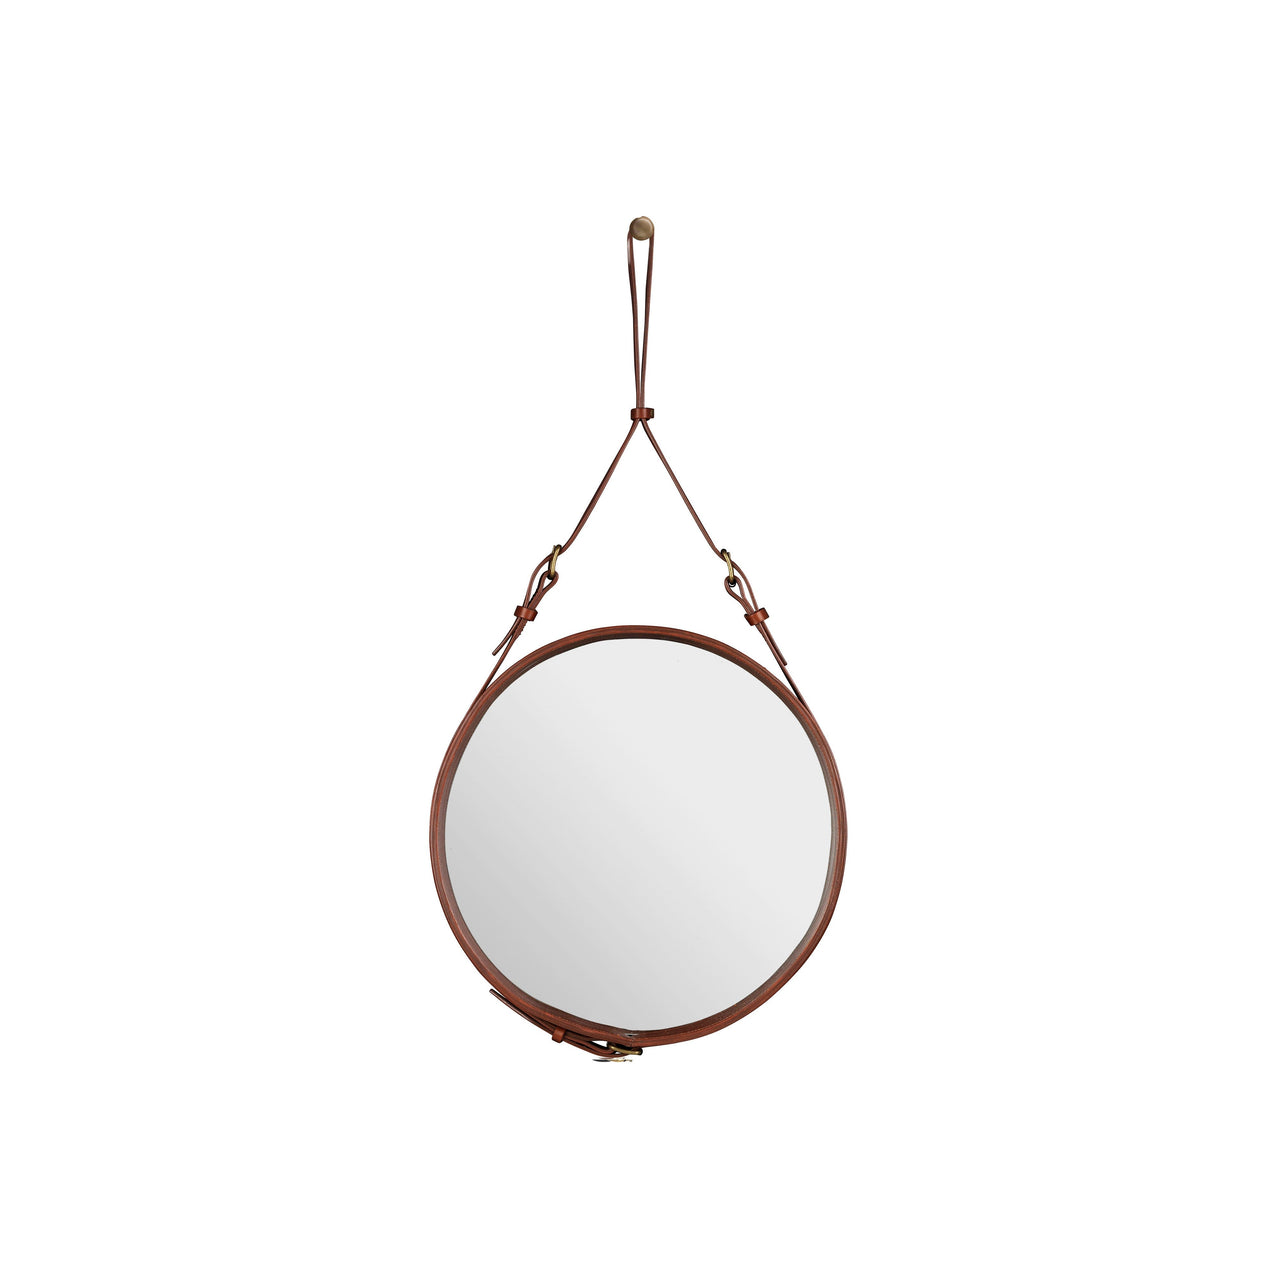 Adnet Circulaire Wall Mirror: Small - 17.7